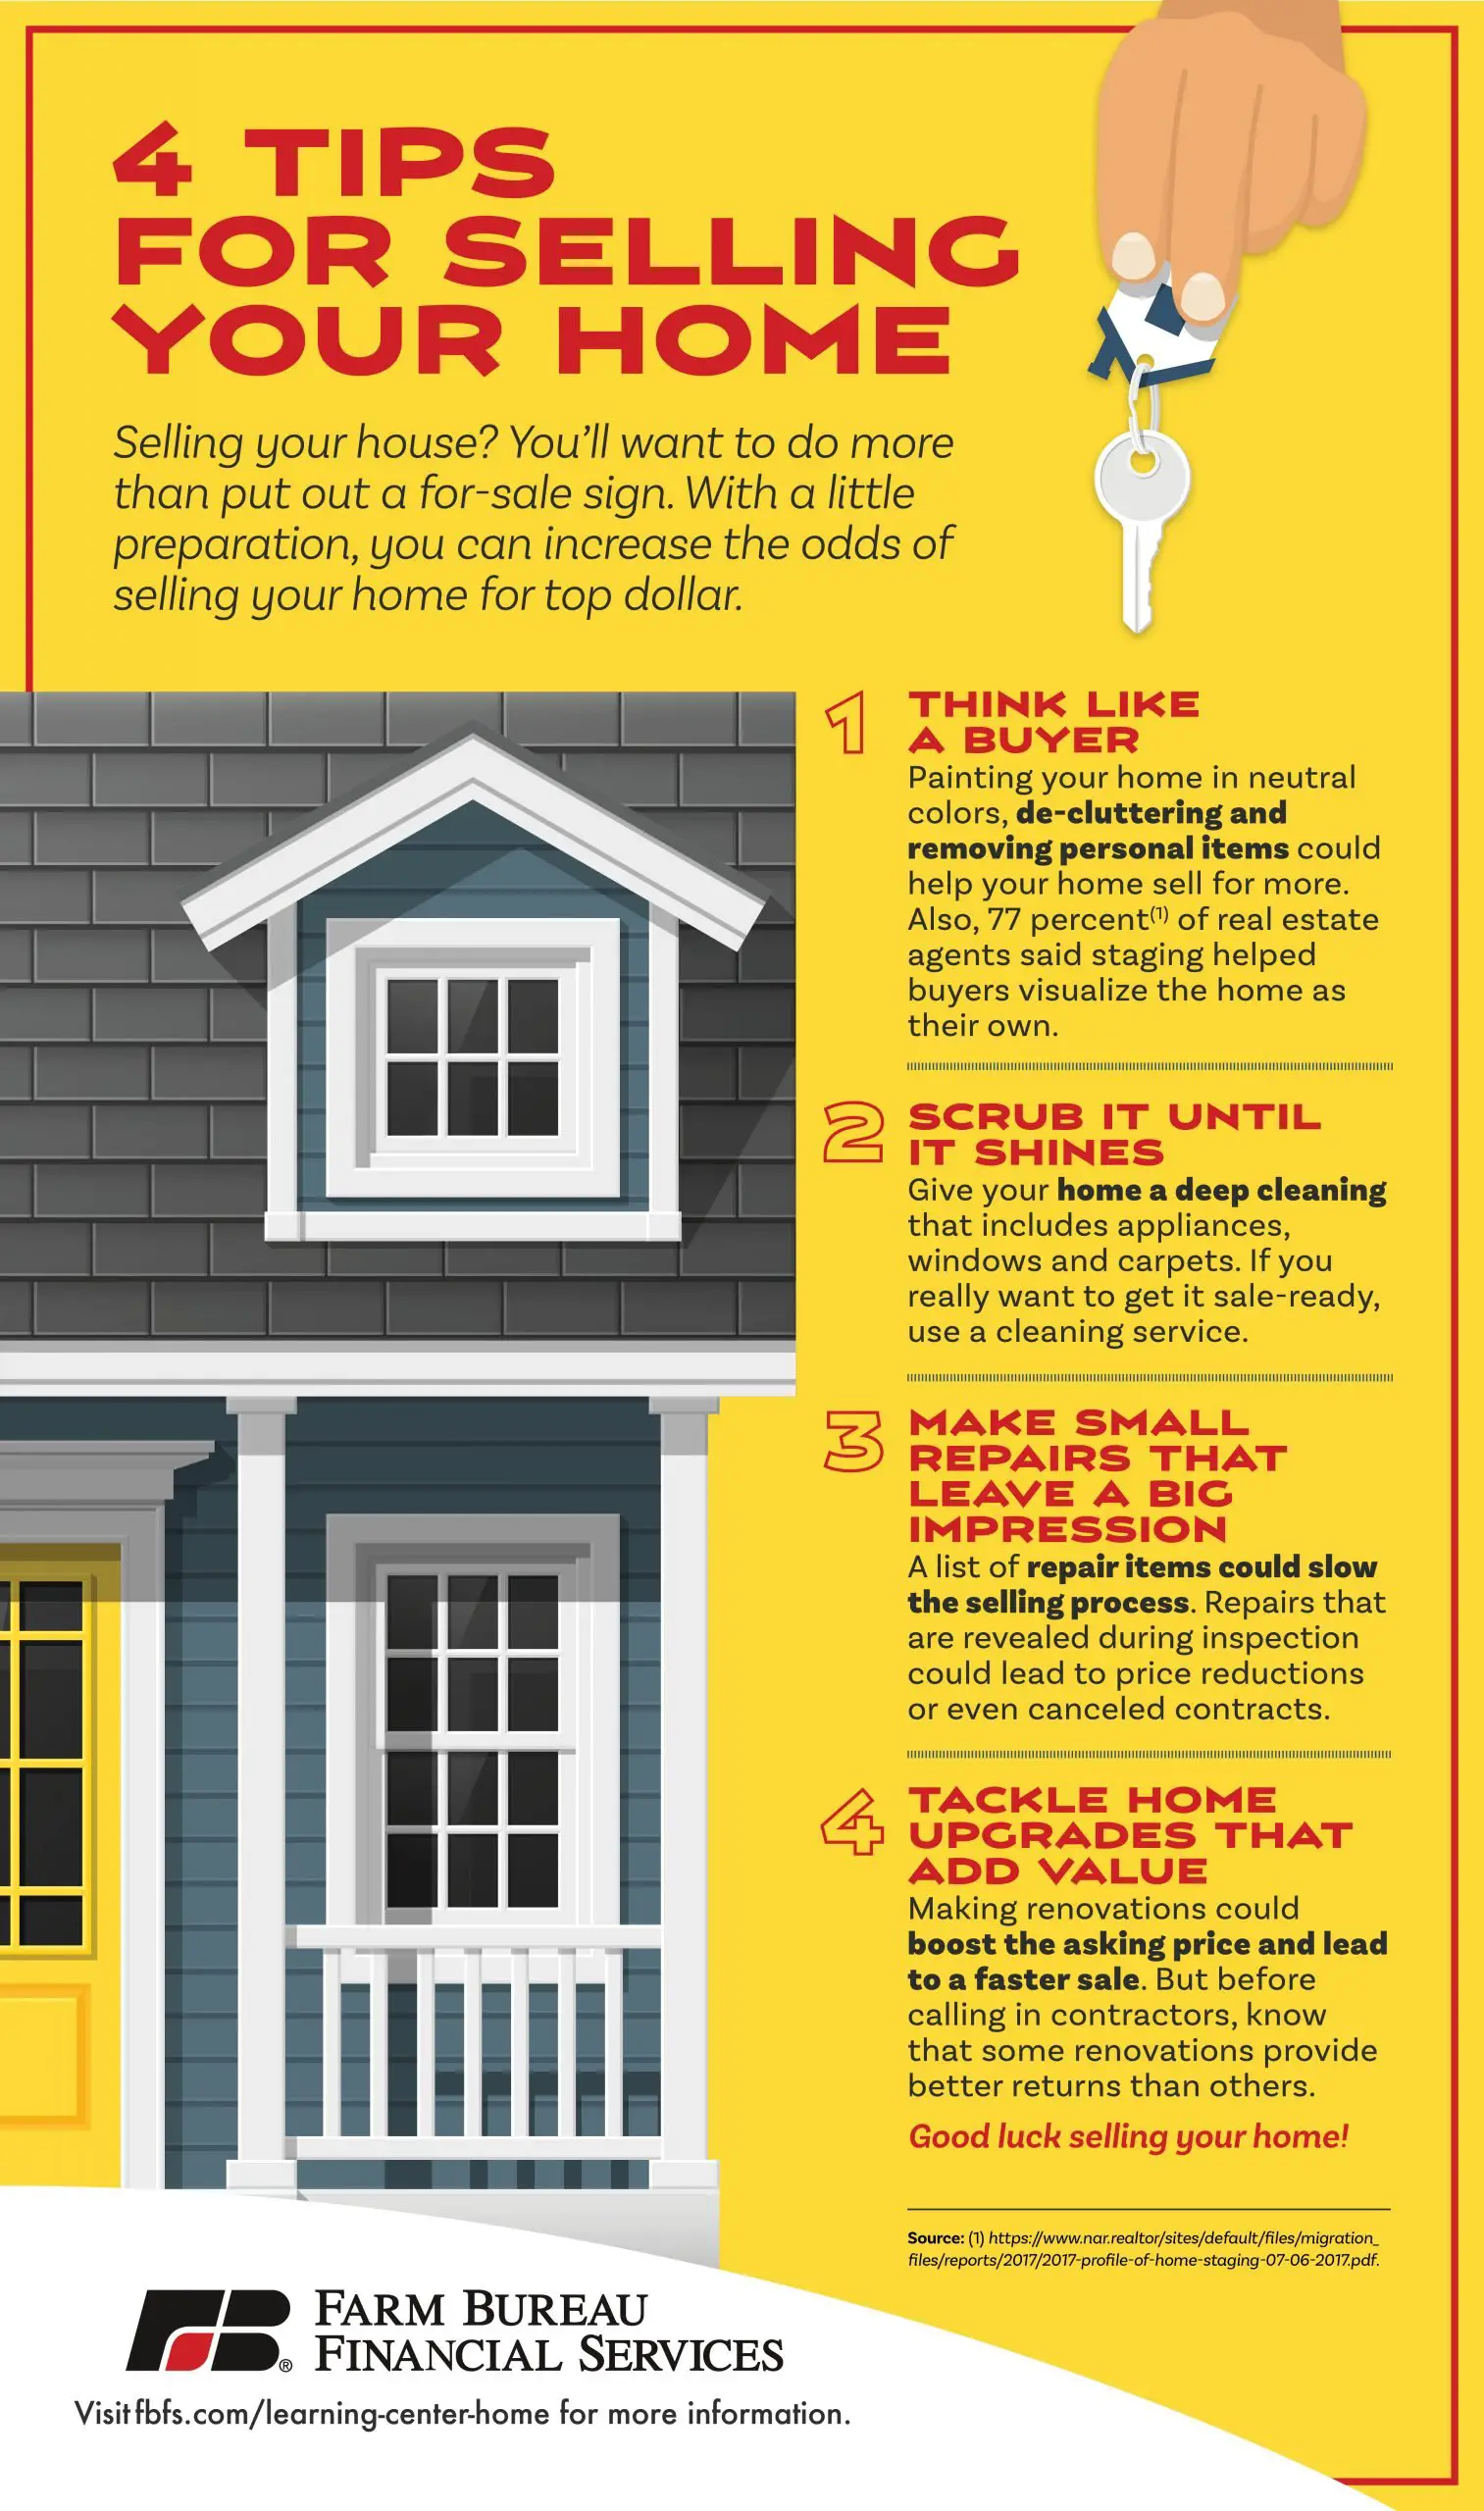 4 Successful Tips for Selling Your Home